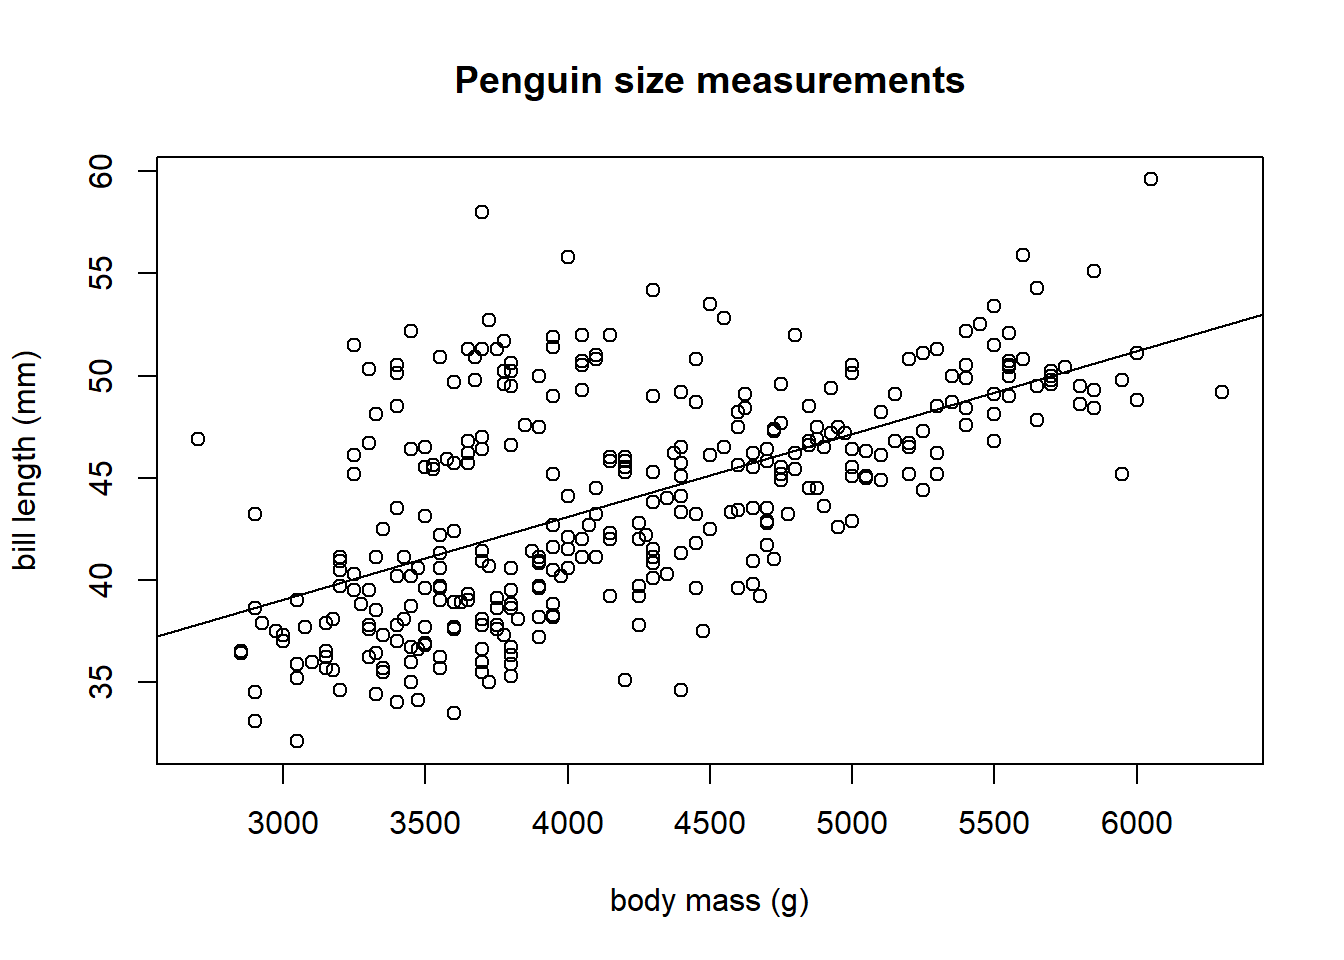 The fitted model overlaid on the penguin data.